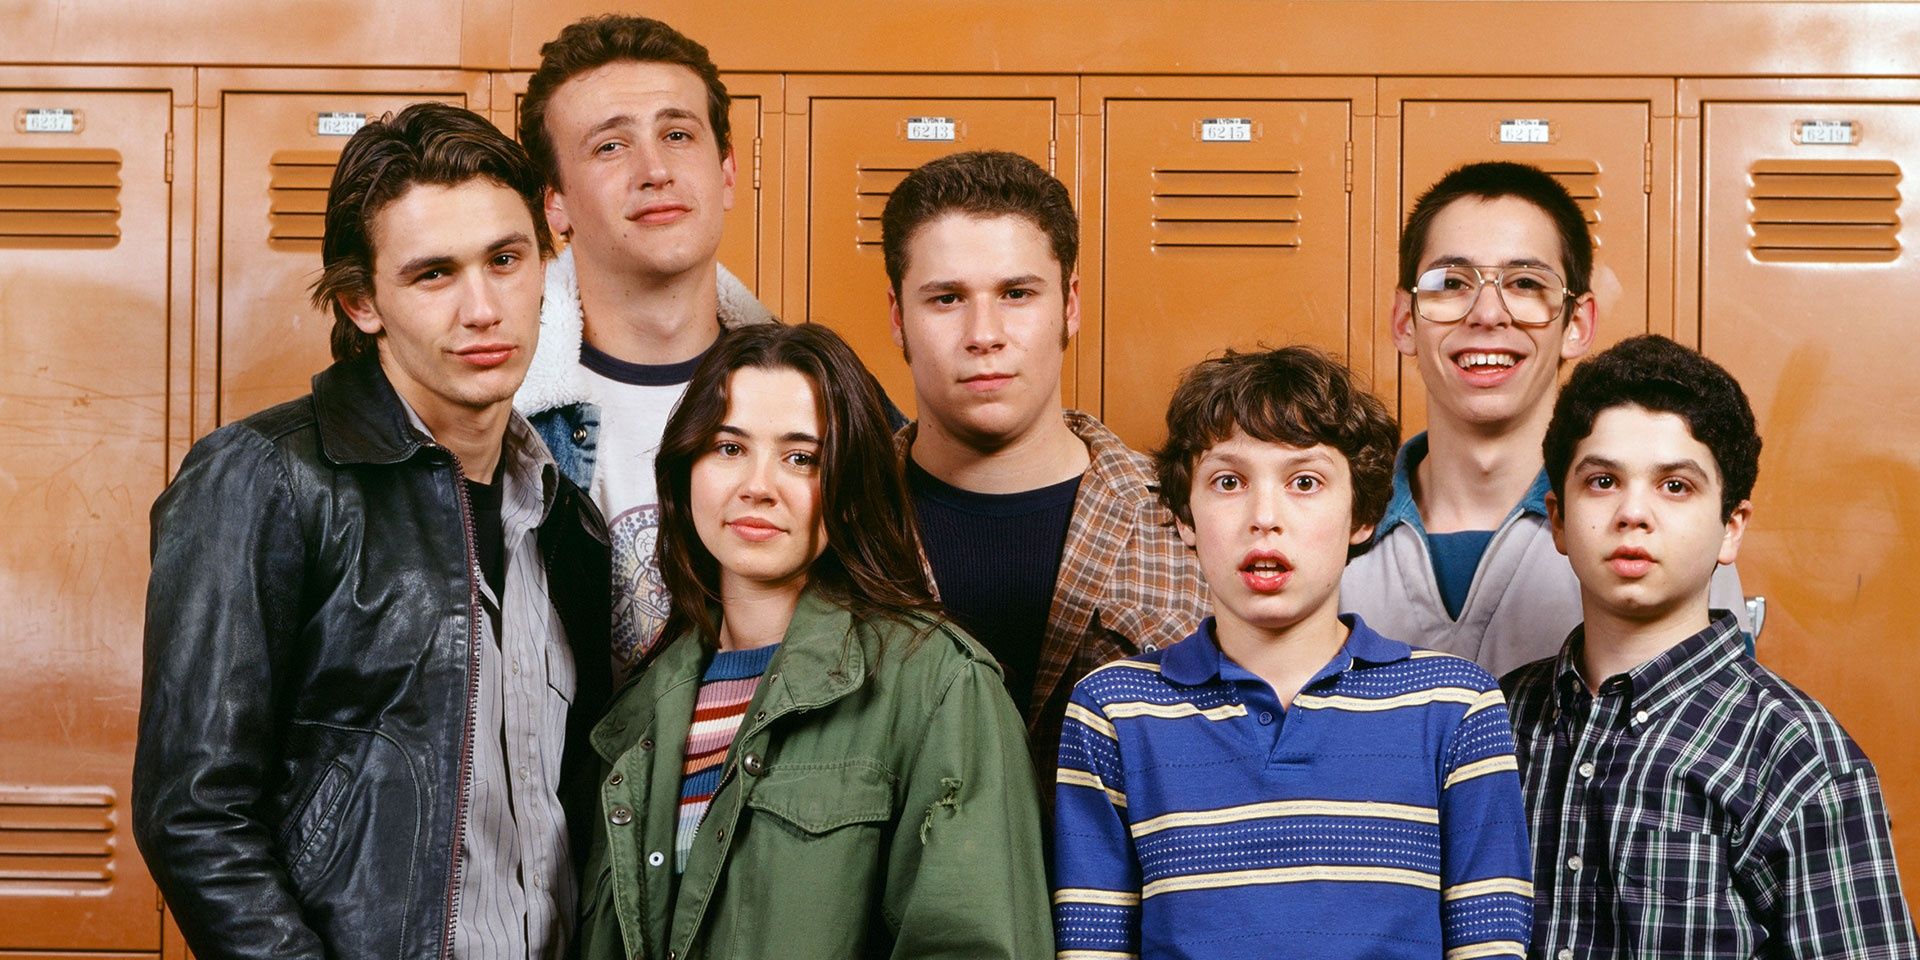 A Freaks and Geeks promo photo.